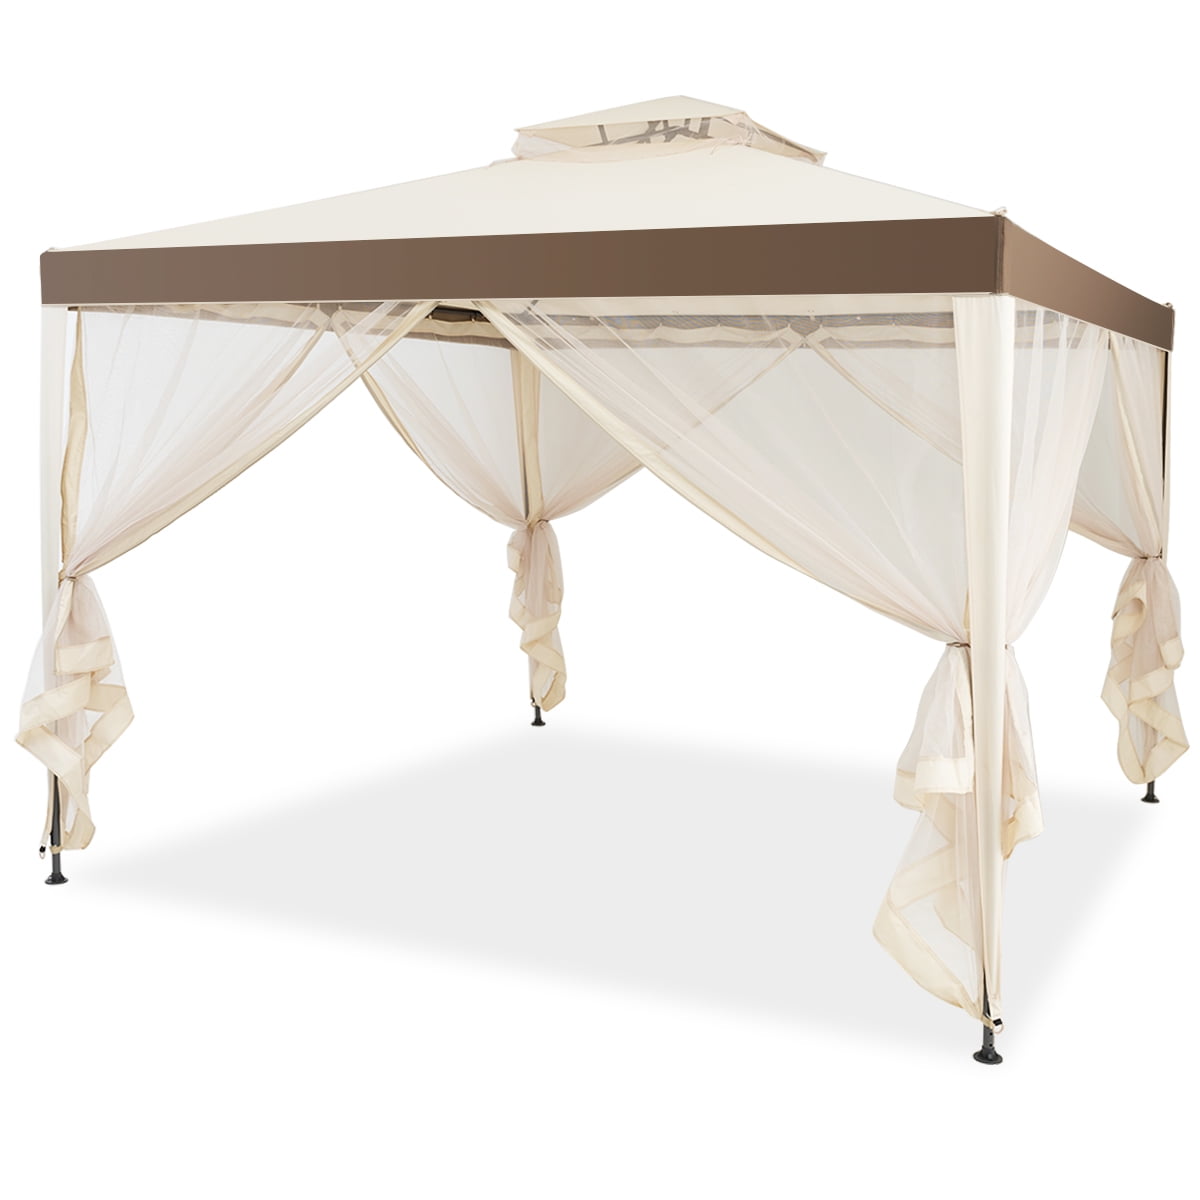 10'x13' 2 Tier Outdoor Gazebo Top Tent Cover Sunshade Canopy Replacement White 